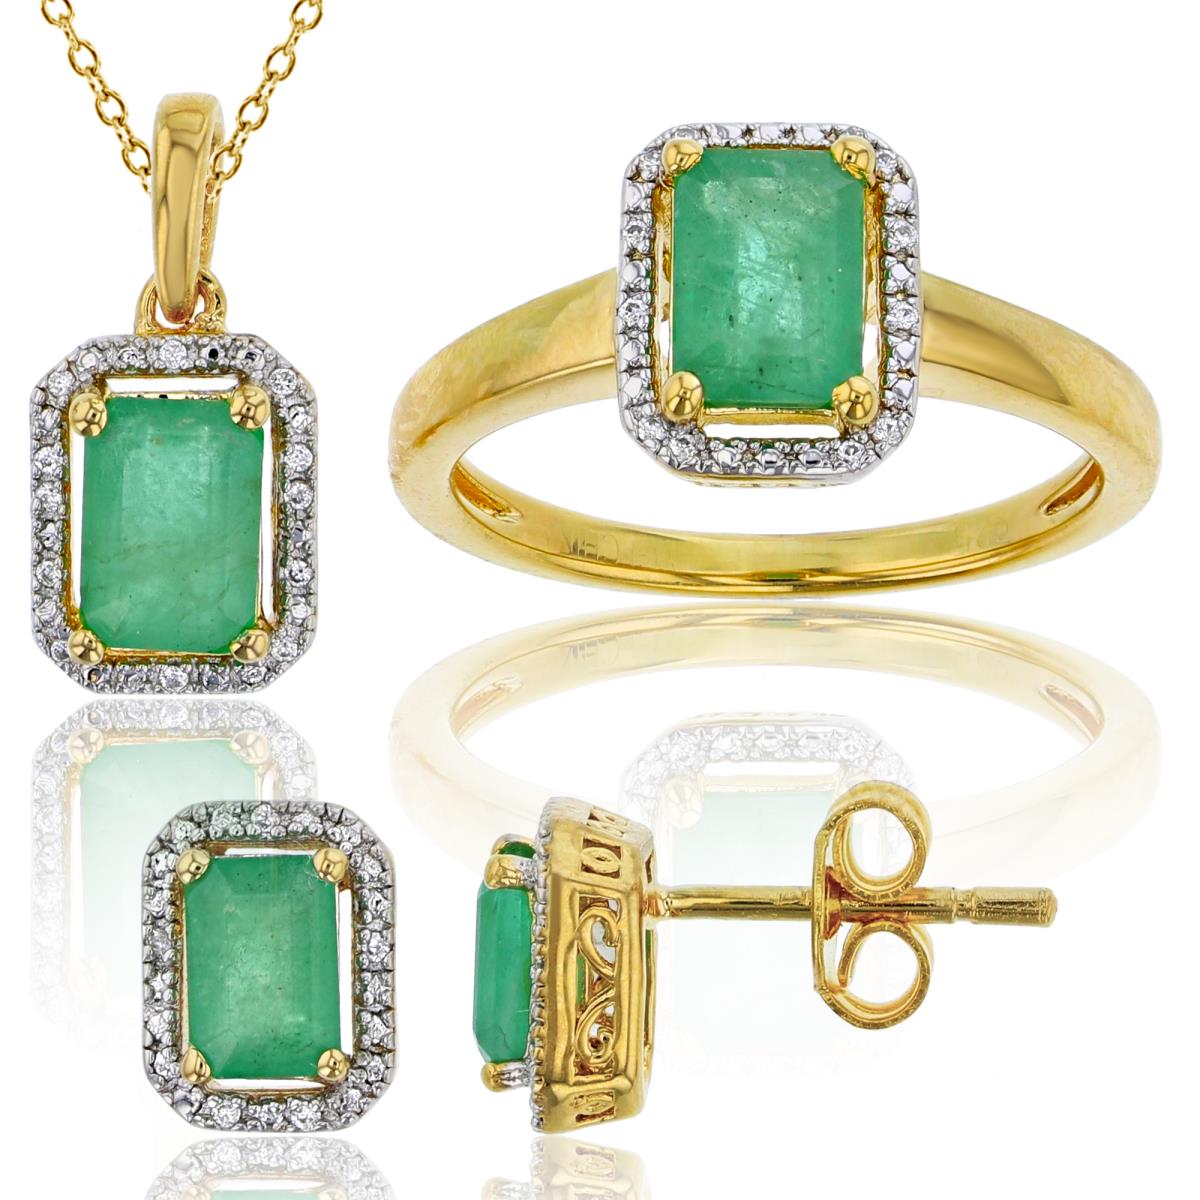 Sterling Silver 1Micron 14ky Gold Plating Rnd CZ & Octag Emerald Ring/Earring/Pendant Halo Set